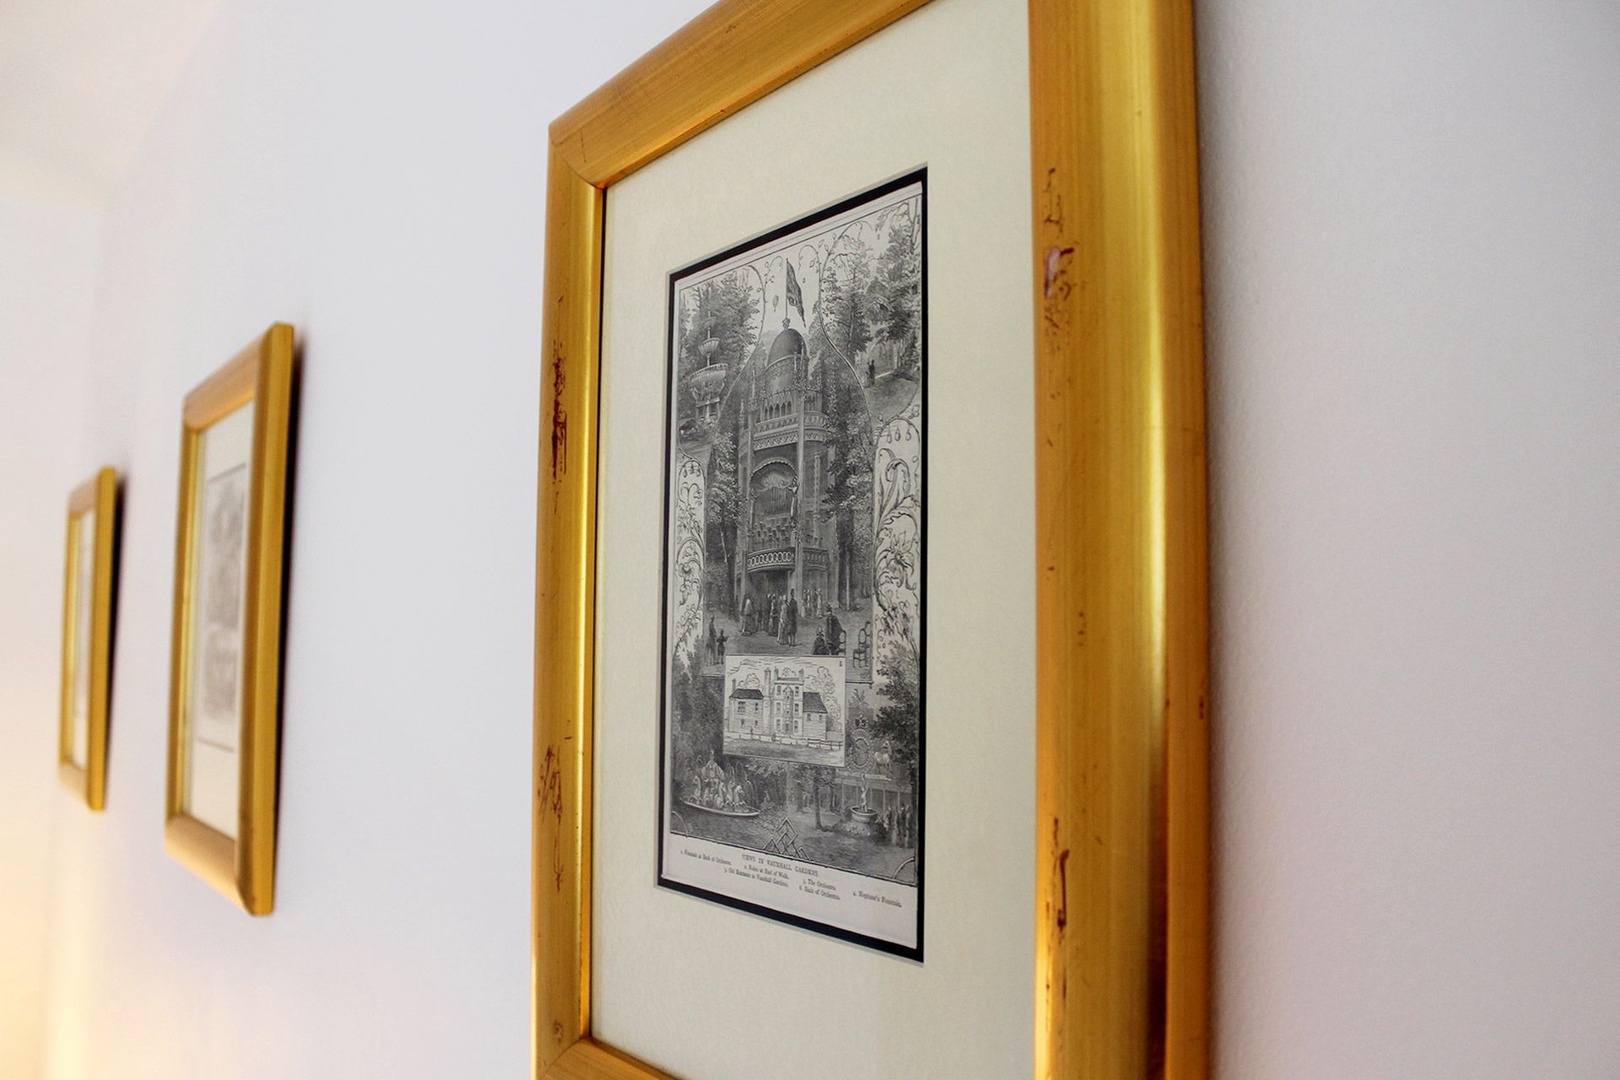 Lovely framed pictures in the first bedroom